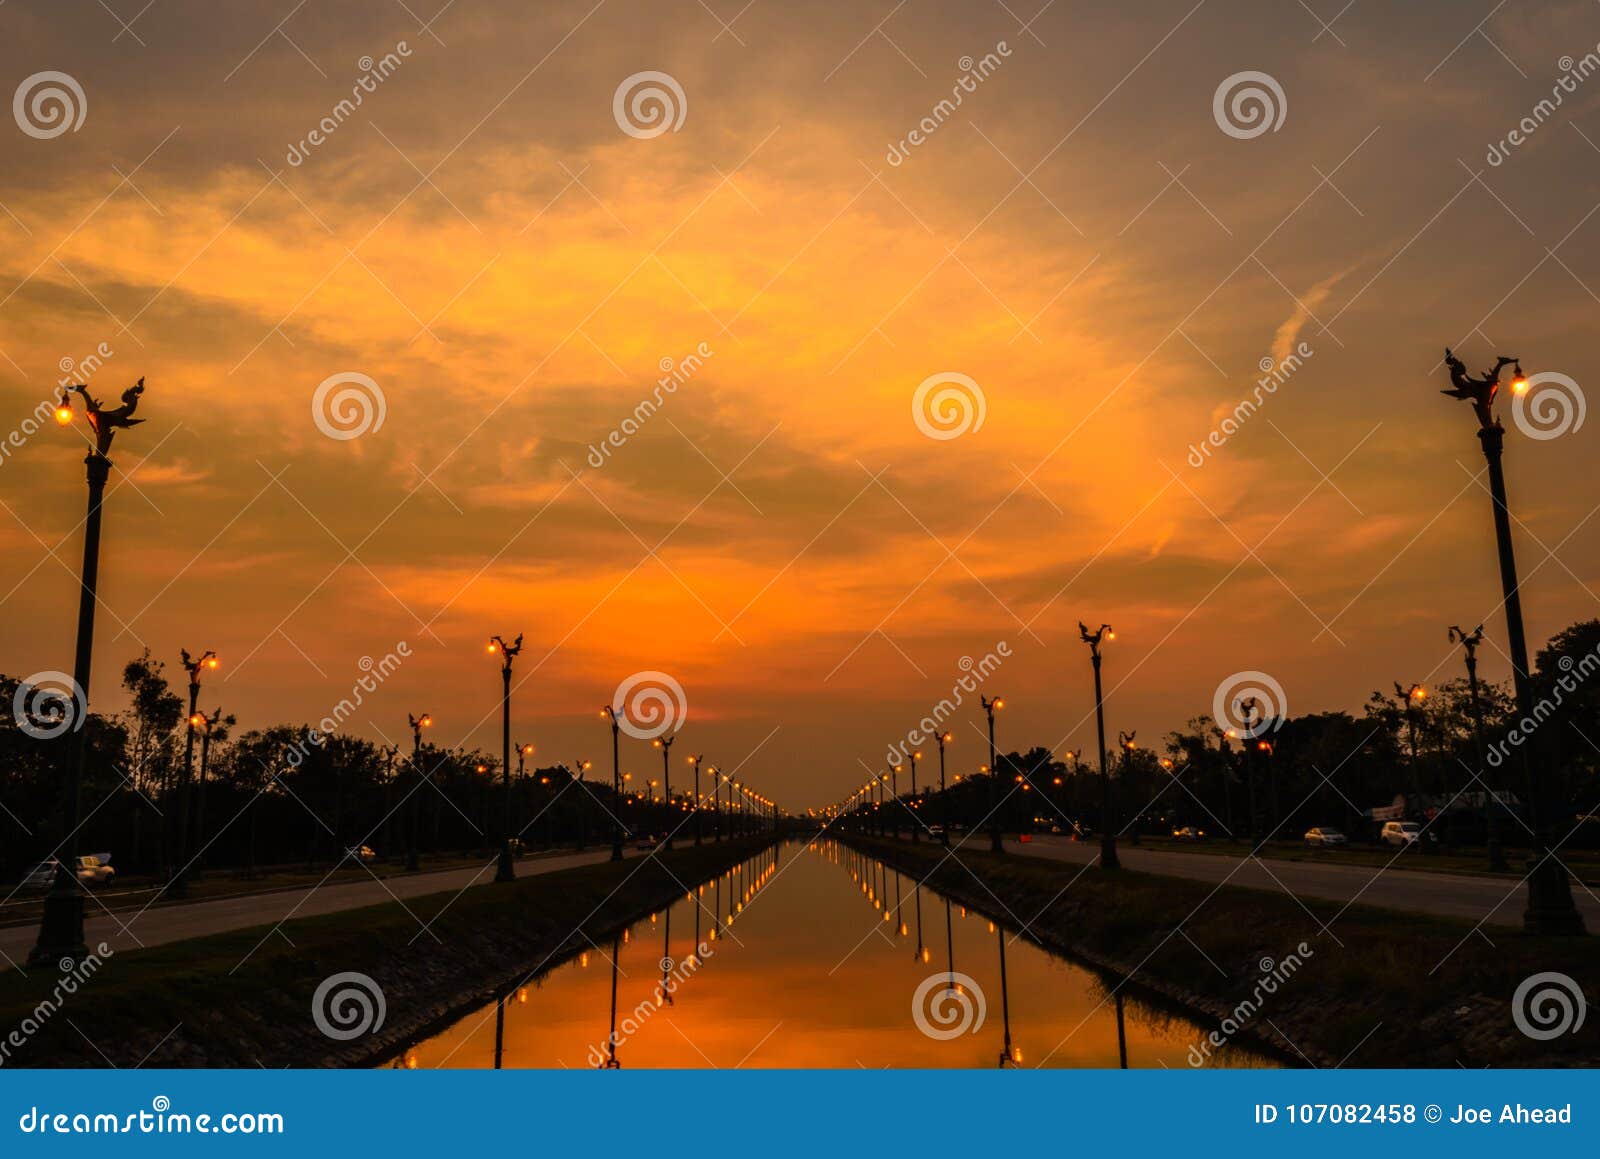 Sunset Over a Highway Utthayan Road and Reflection on the River. Stock